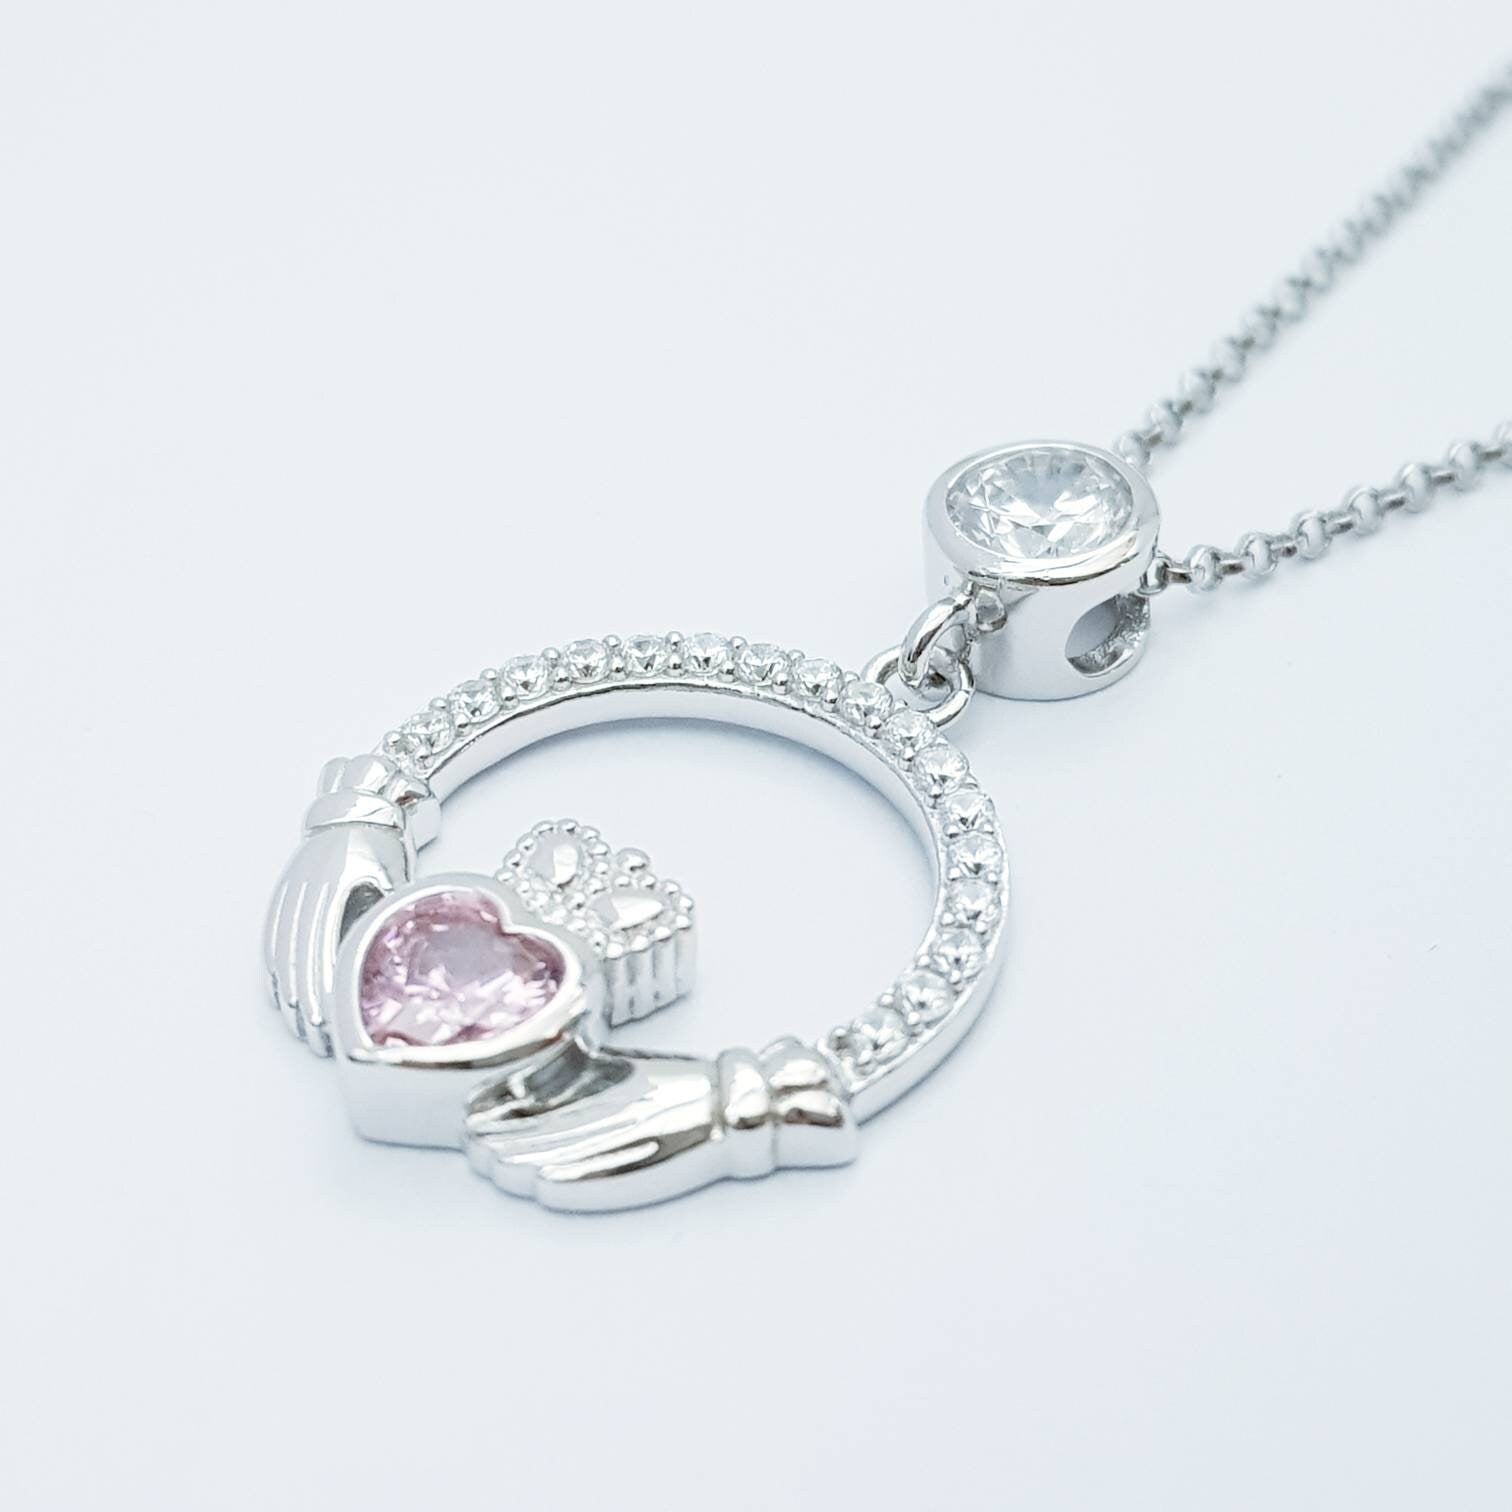 Pink Claddagh pendant, claddagh necklace, silver claddagh pendant with October birthstone